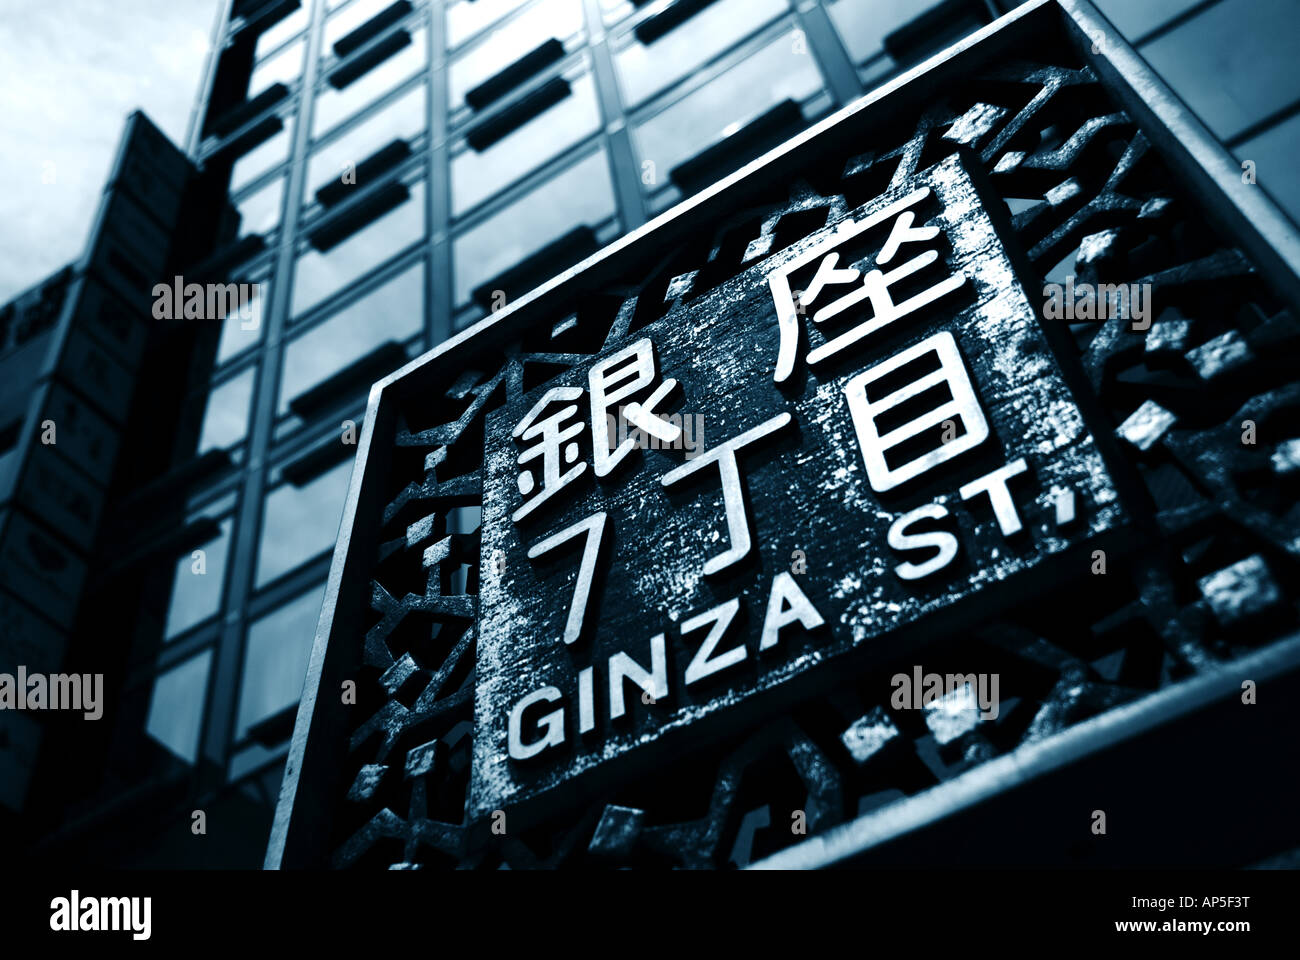 Ornate iron street sign in upmarket Ginza shopping district of Tokyo Japan Stock Photo